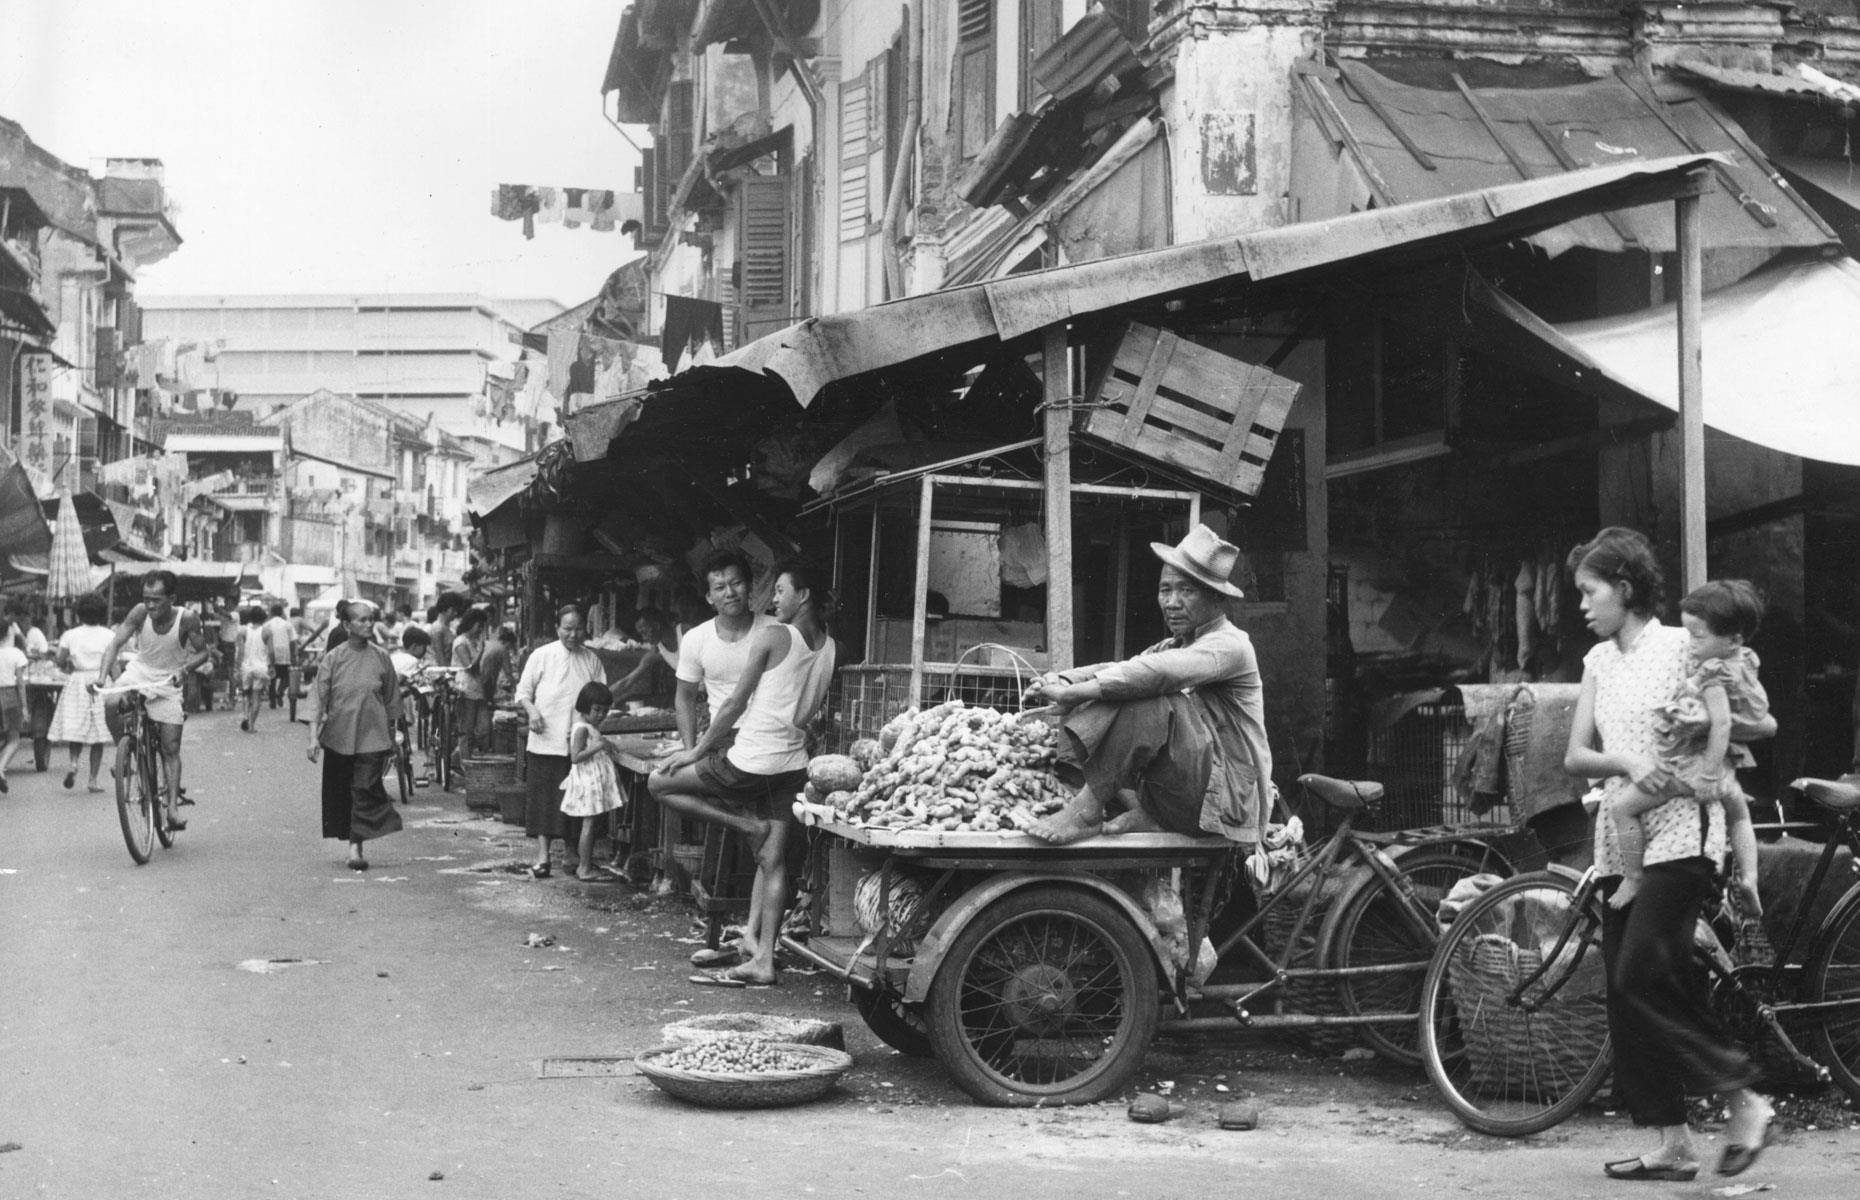 <p>When Singapore gained independence from Malaysia in 1965, the tiny city-state was plagued by poverty and high unemployment. A third of the population lived in squalid slums, up to half the new nation's residents were illiterate, and GDP per capita was stuck at just $516 (£362).</p>  <p>With no natural resources, Singapore's economic prospects were looking very bleak indeed. The country's saviour came in the form of its first prime minister, Lee Kuan Yew, who set about transforming Singapore into a highly developed metropolis. </p>